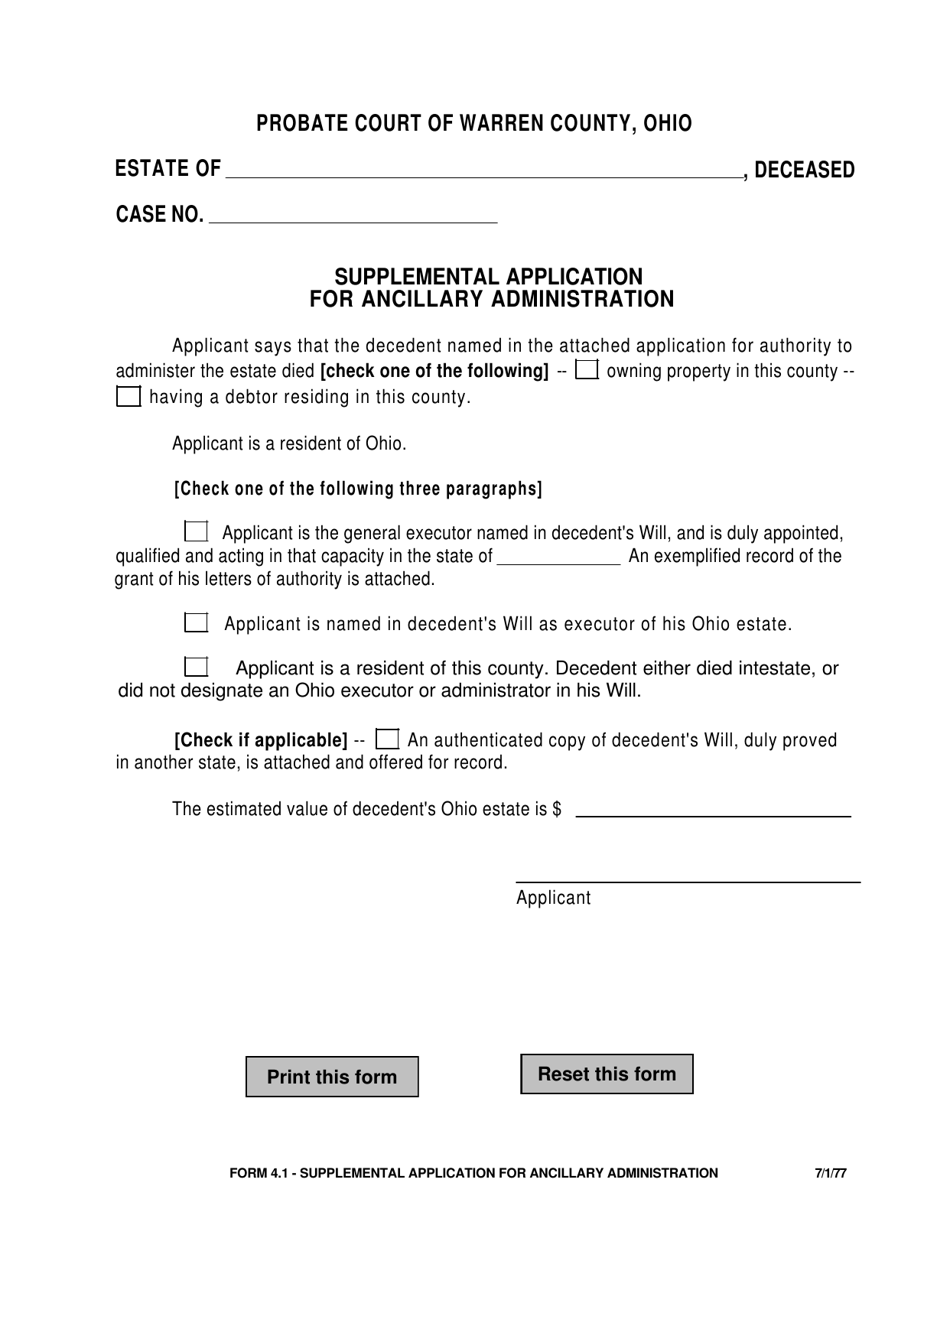 Form 4.1 Supplemental Application for Ancillary Administration - Warren County, Ohio, Page 1